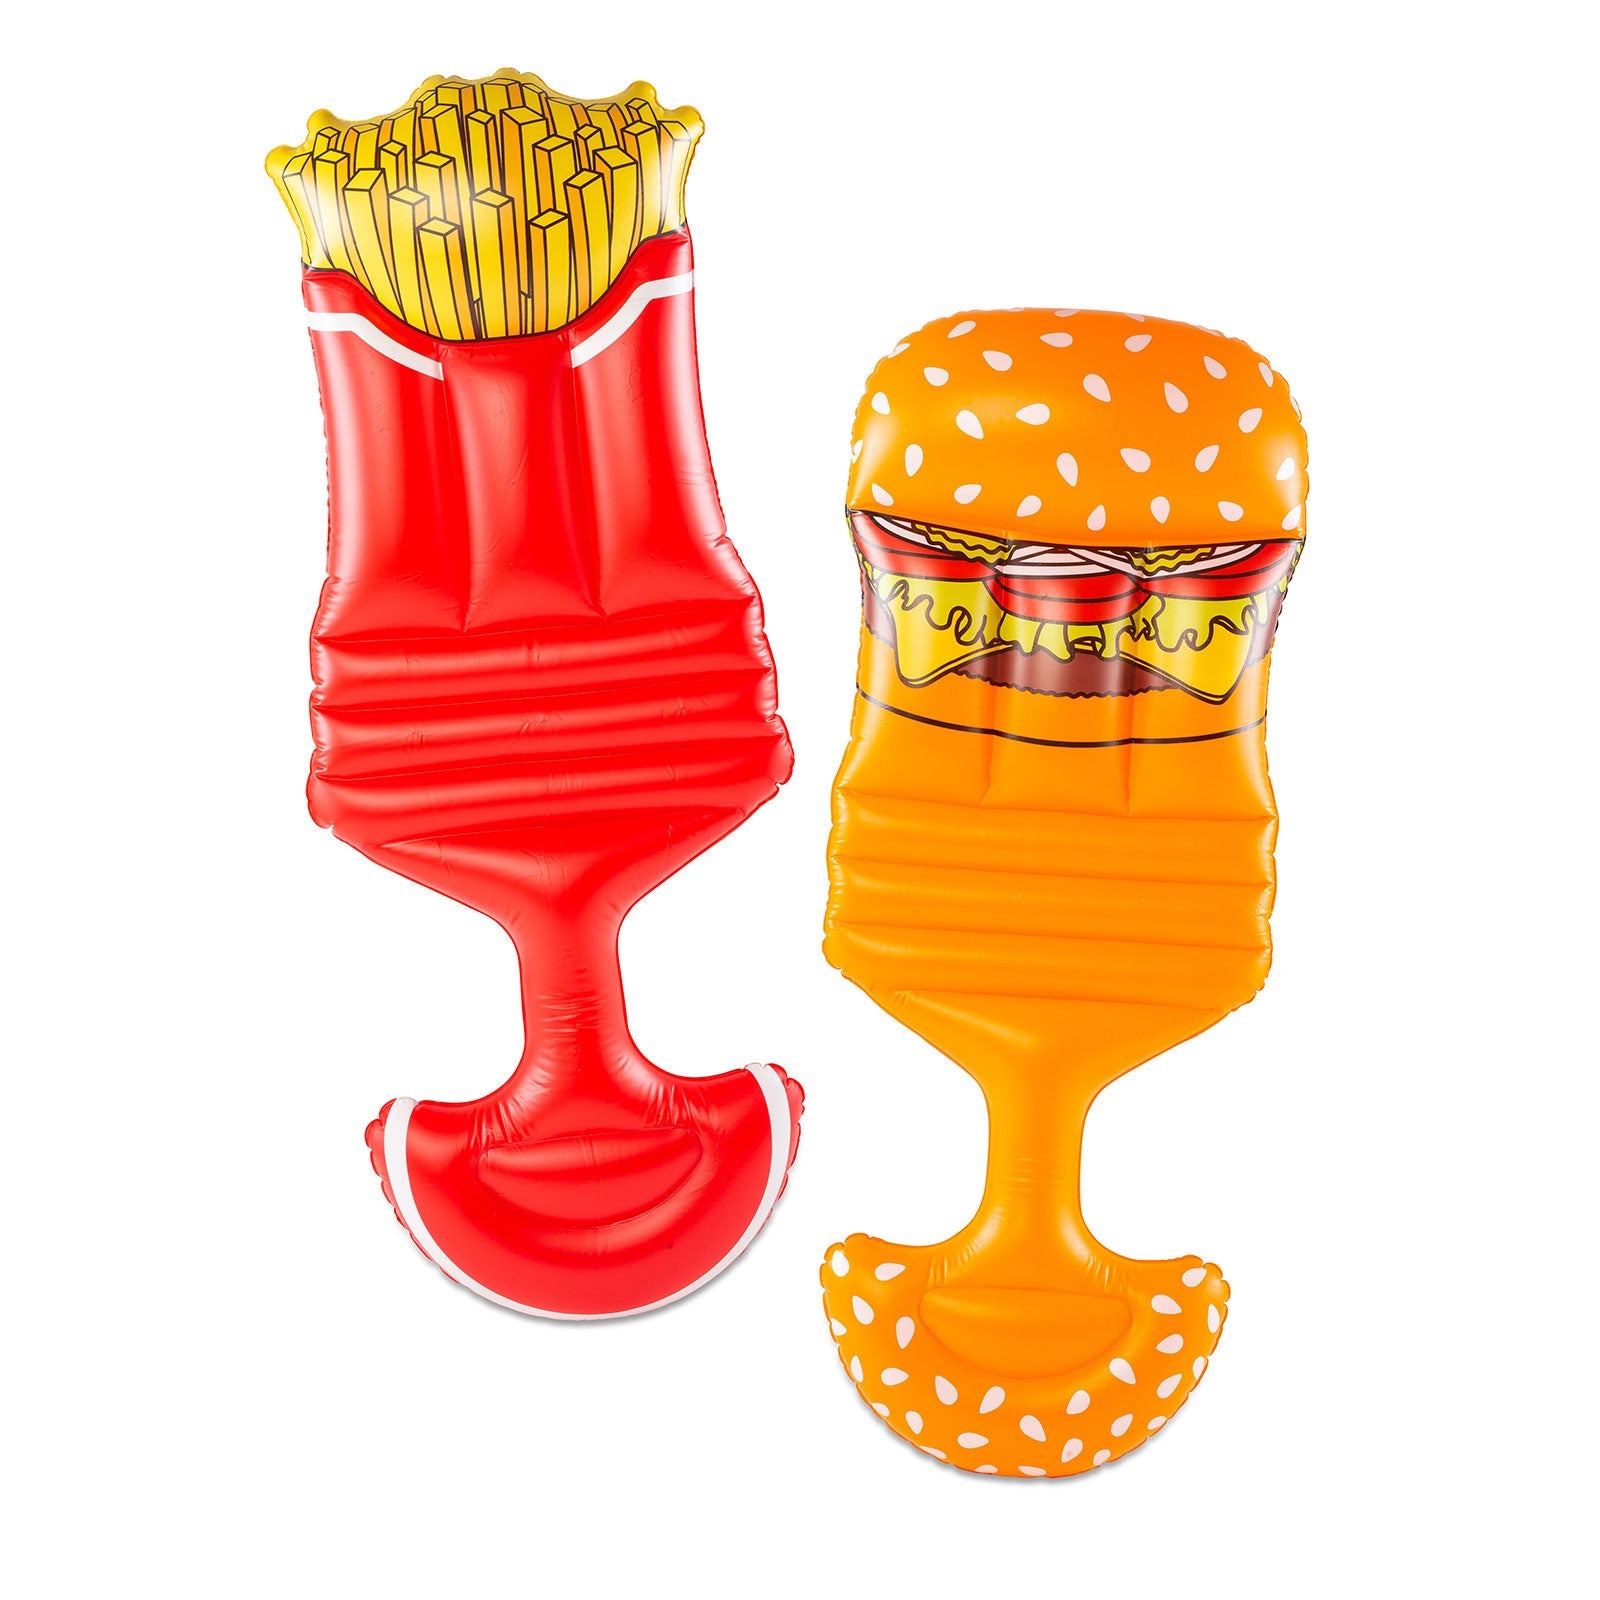 Burger and Fries Saddle Seat Float